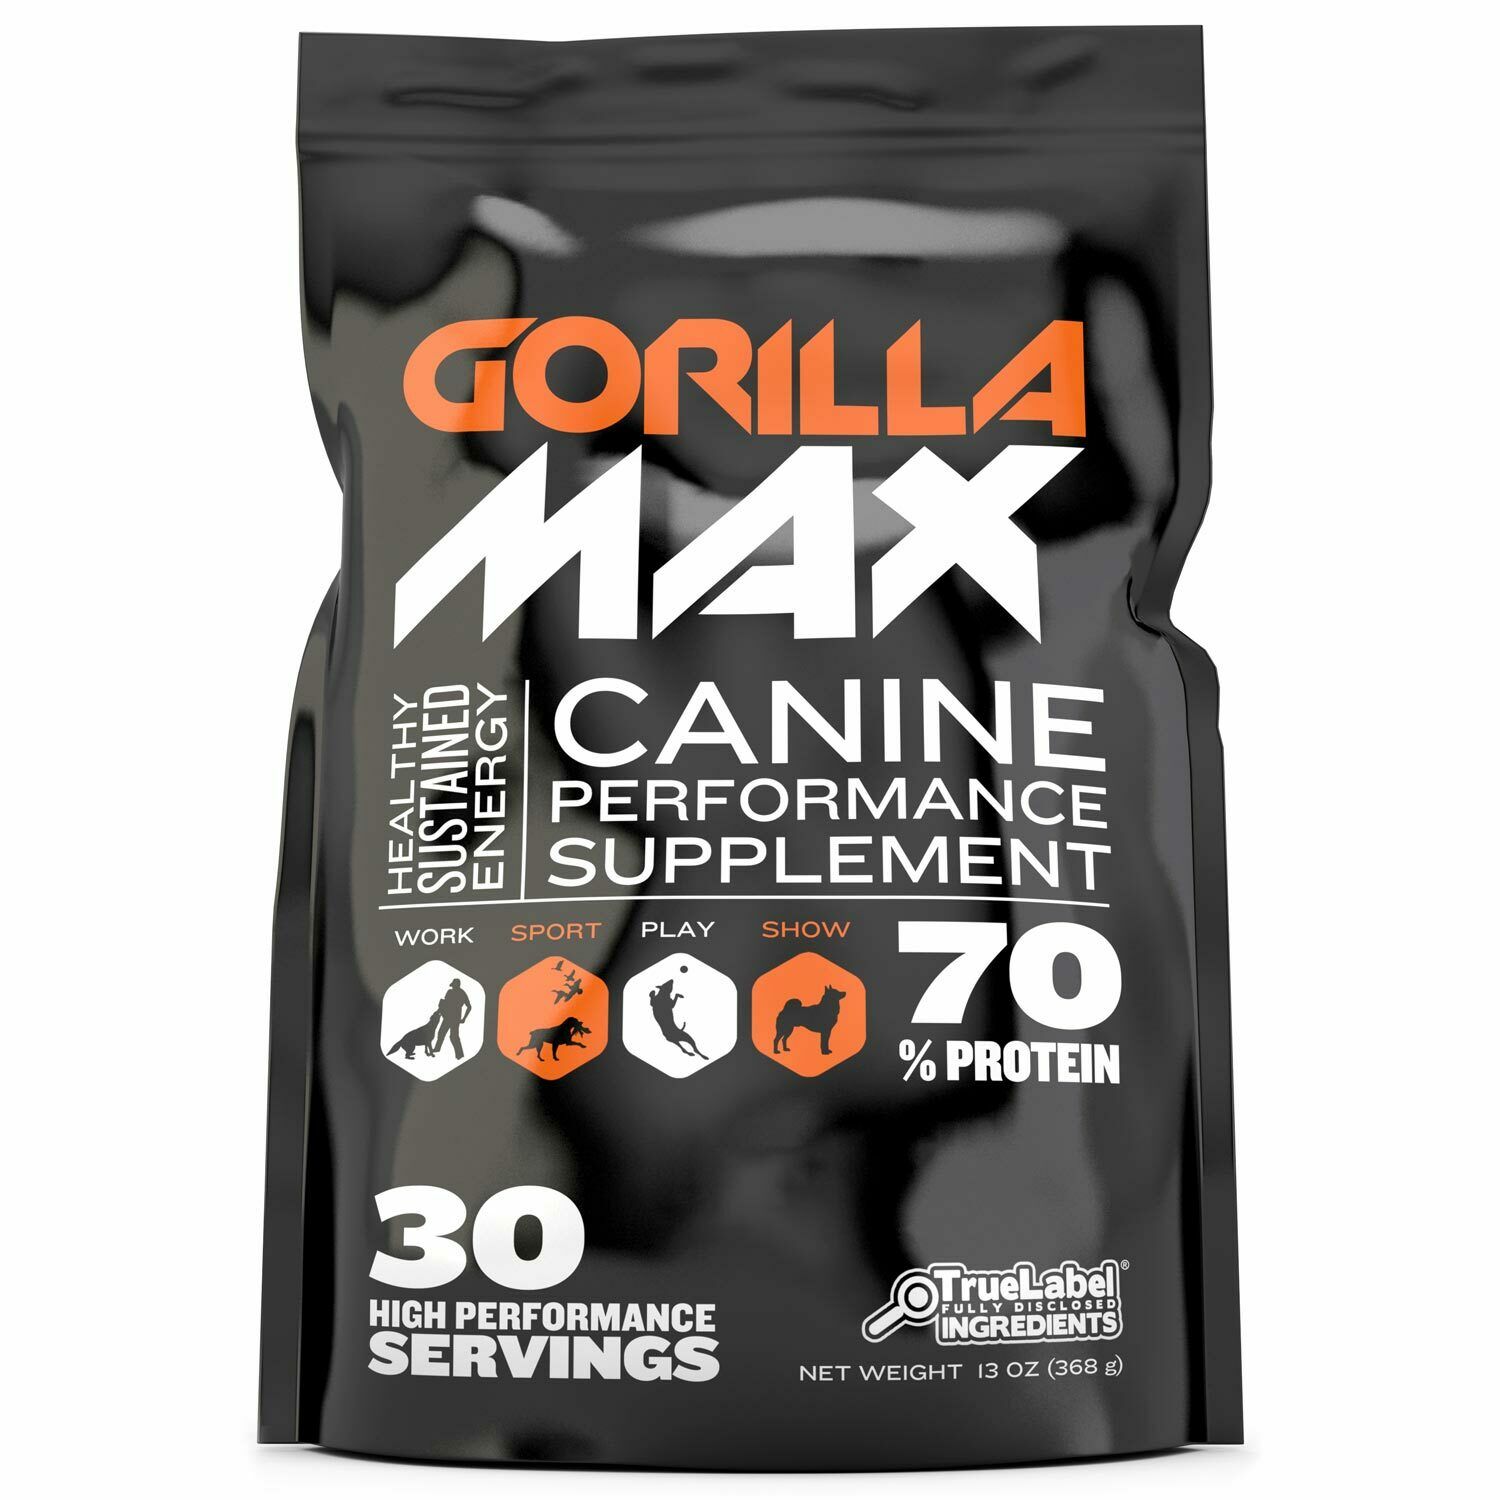 Gorilla Max Muscle Building Powder For Pit Bulls, Bulldogs, & Working Breeds